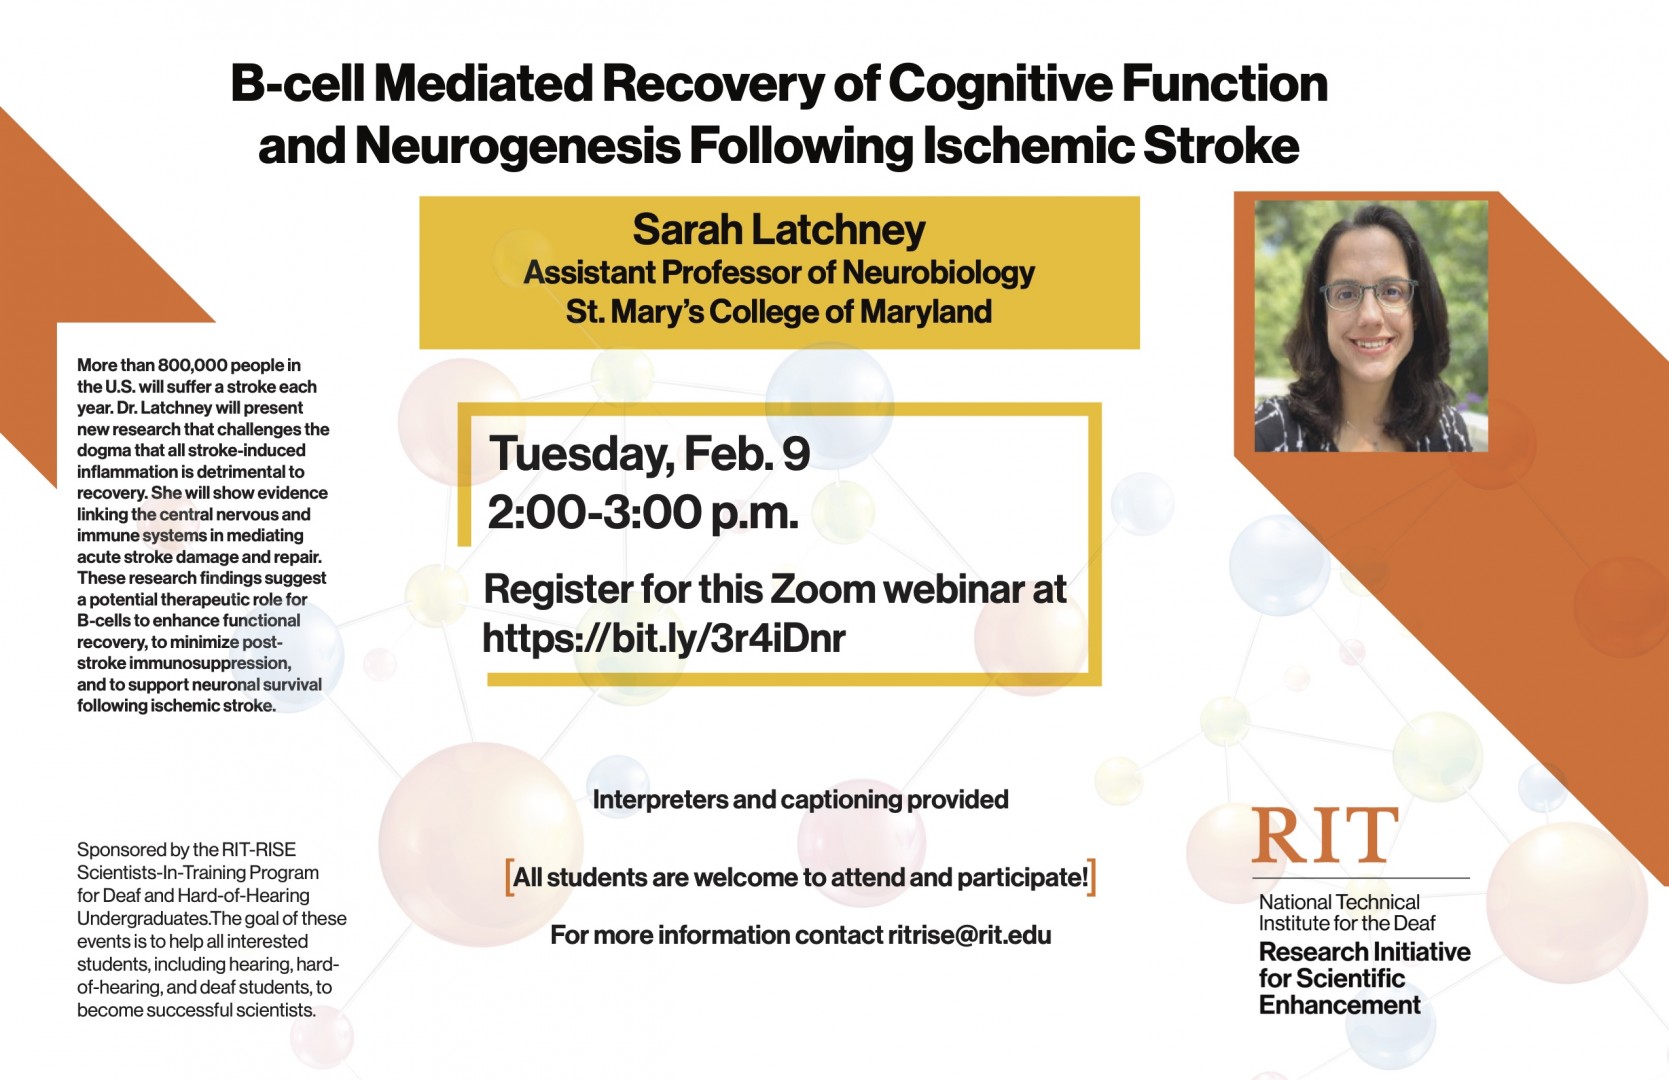 “B-cell mediated recovery of cognitive function and neurogenesis following ischemic stroke” presented by Dr. Sarah Latchney. Interpreters and captioning provided. All students are welcome to attend and participate! Tuesday, February 9 at 2-3pm. Register for this Zoom webinar at https://rit.zoom.us/webinar/register/WN_WdD8GL6VQ-uHWqMWDekqlA For more information contact ritrise@rit.edu